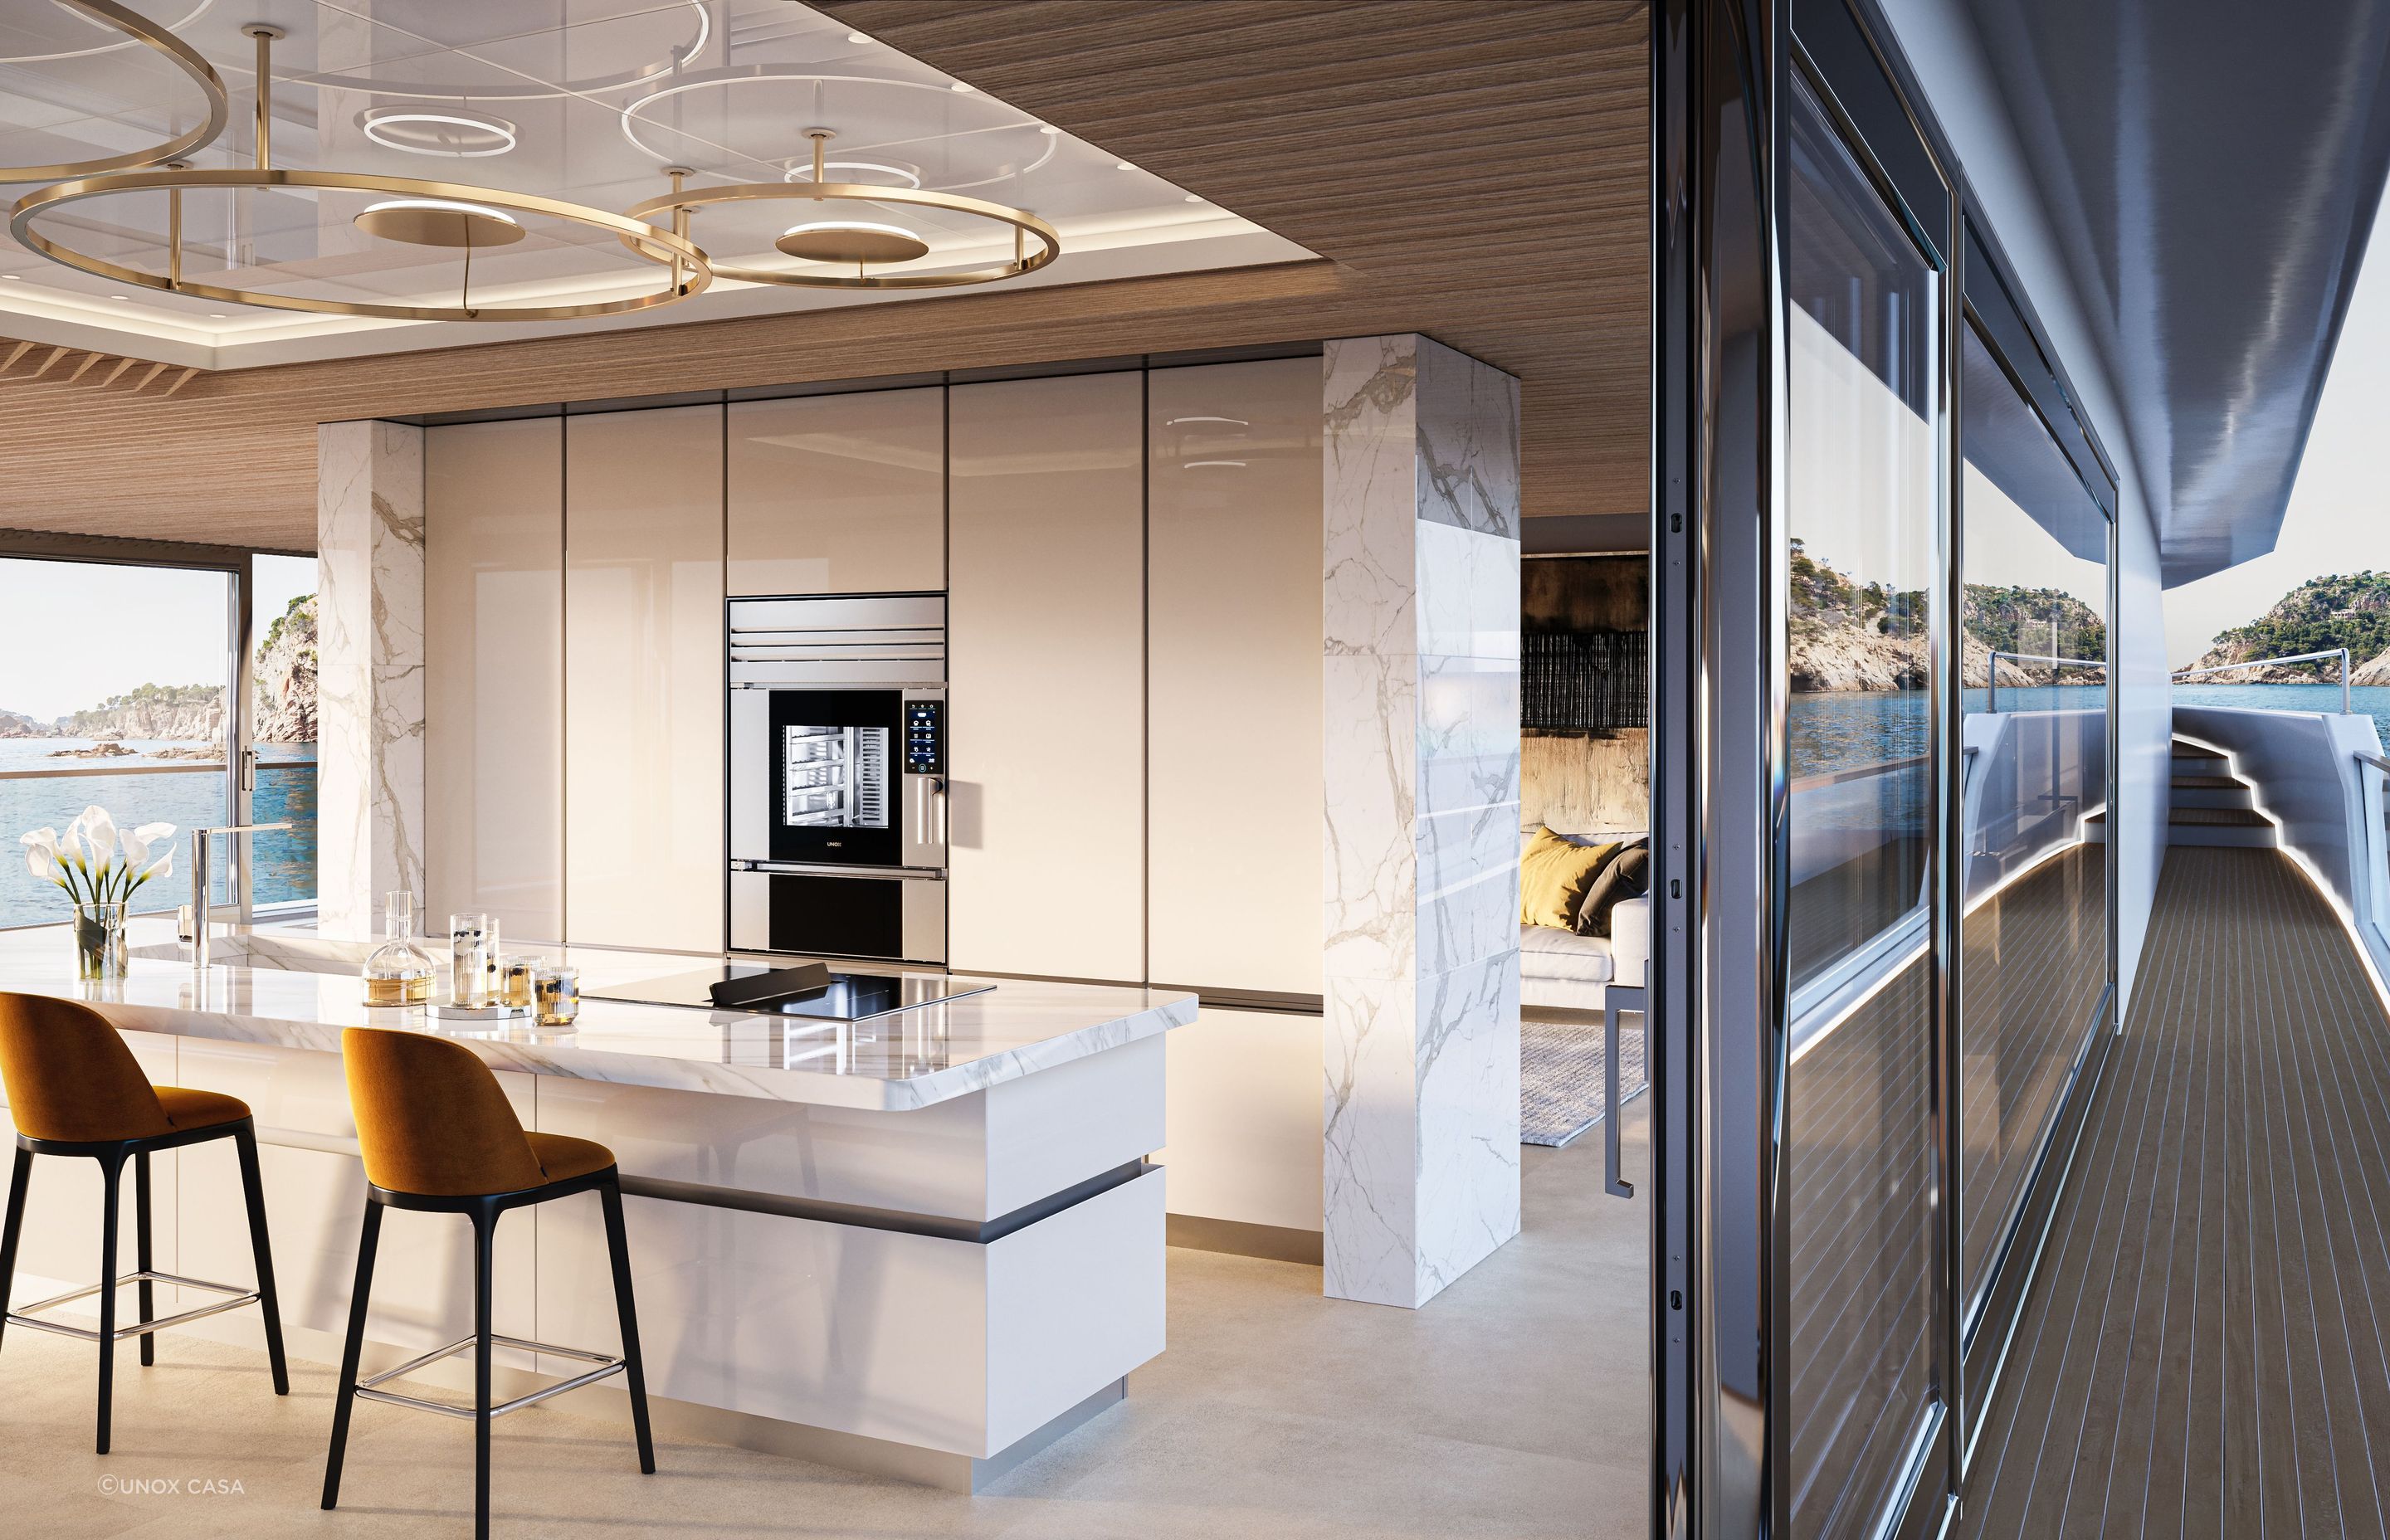 The Model 1S (pictured) is a more compact option designed for smaller kitchens — like those on a yacht.